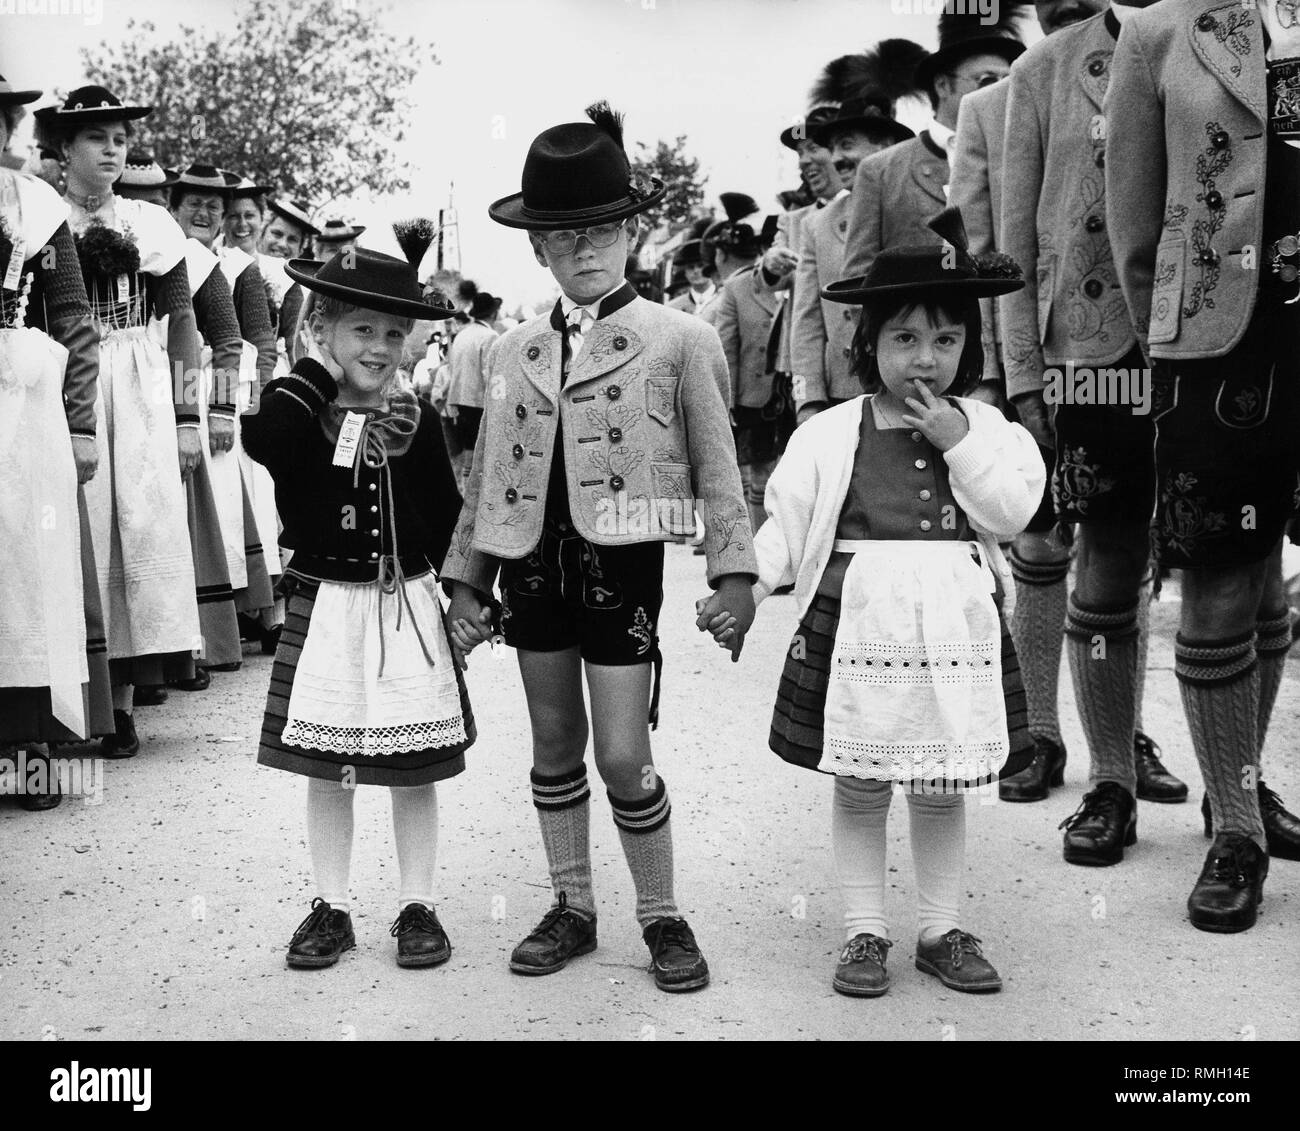 Children in traditional costume at the fesival with traditional costumes in Gmund am Tegernsee. Undated picture. Stock Photo